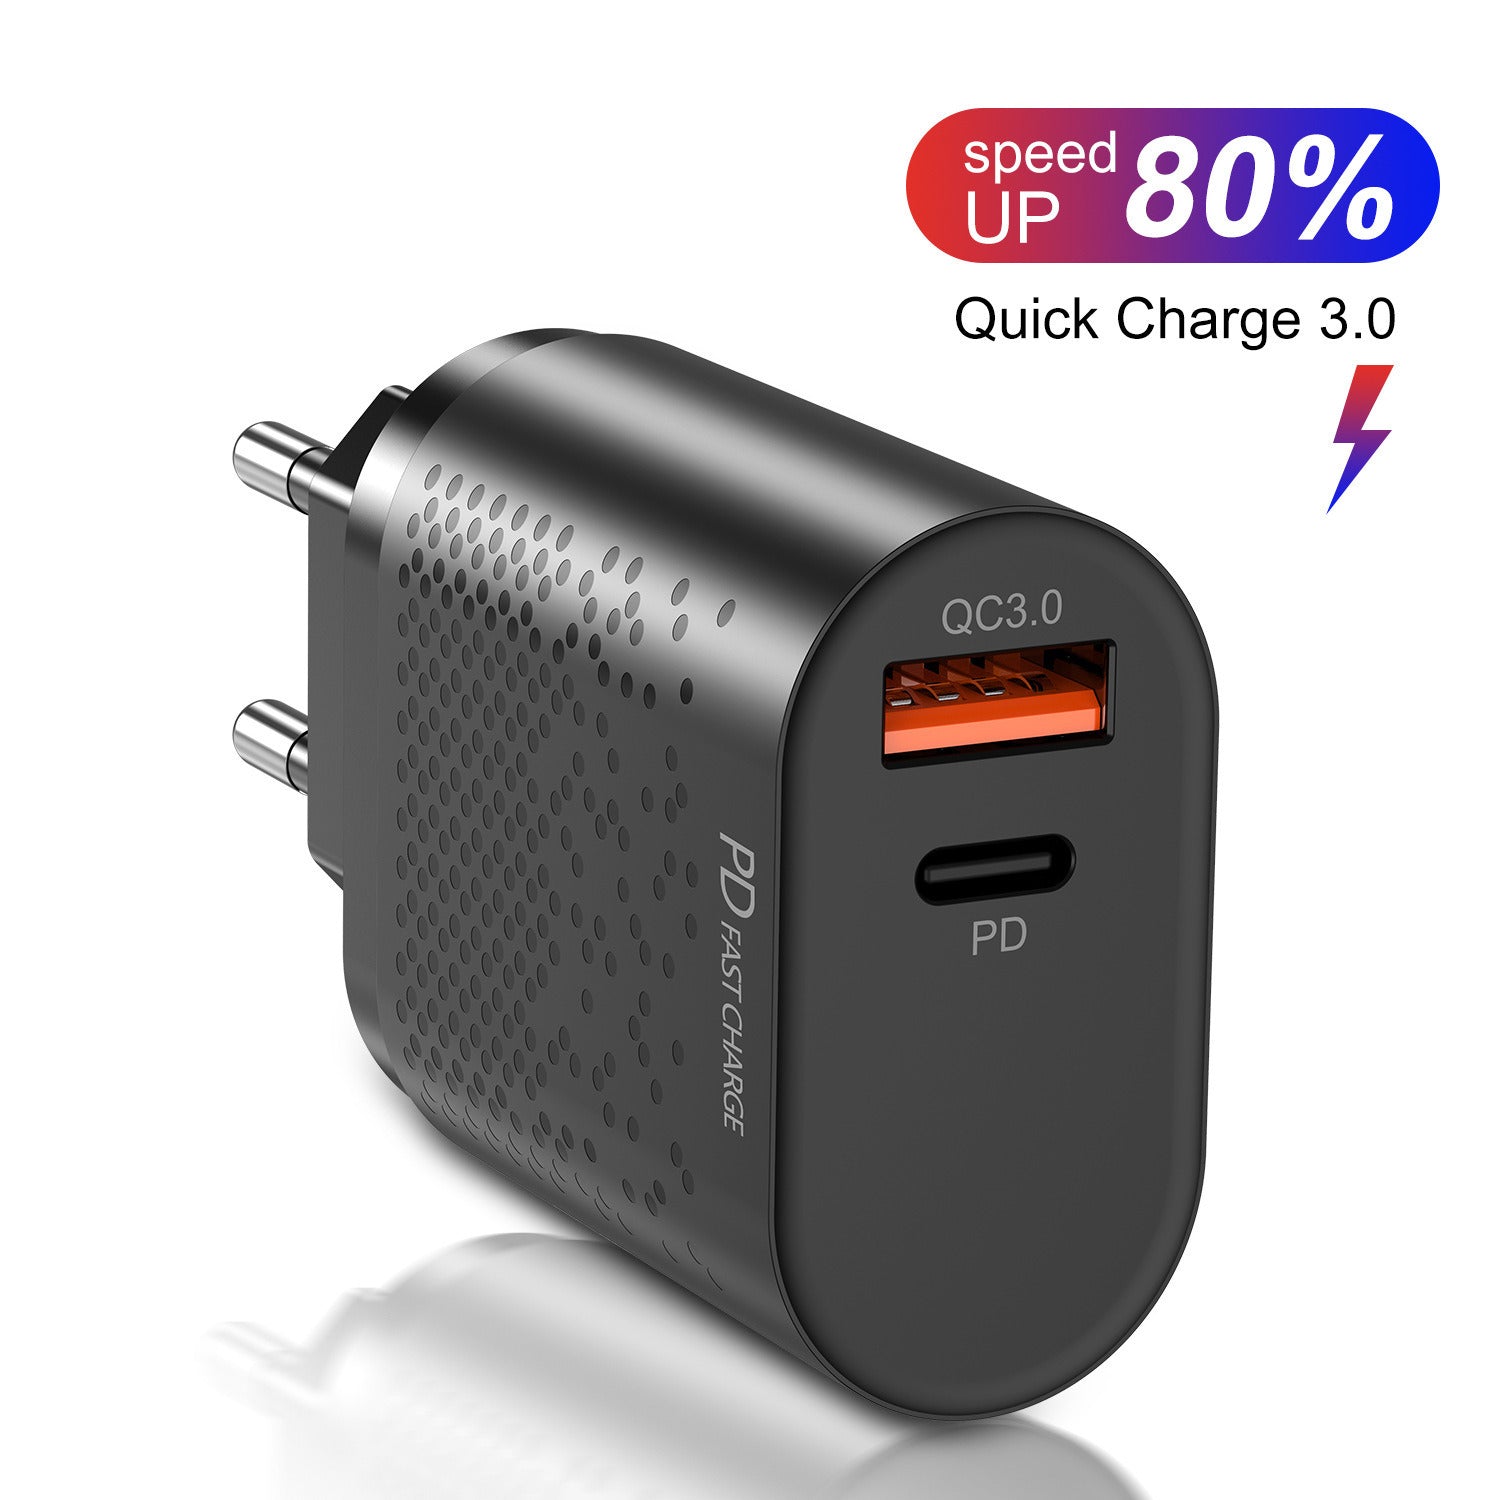 LazyPro™ QCFusion 18W DualPort: The Ultimate QC3.0 & PD Fast Charger - USB-A + Type-C Combo for Apple & Android (US Standard)